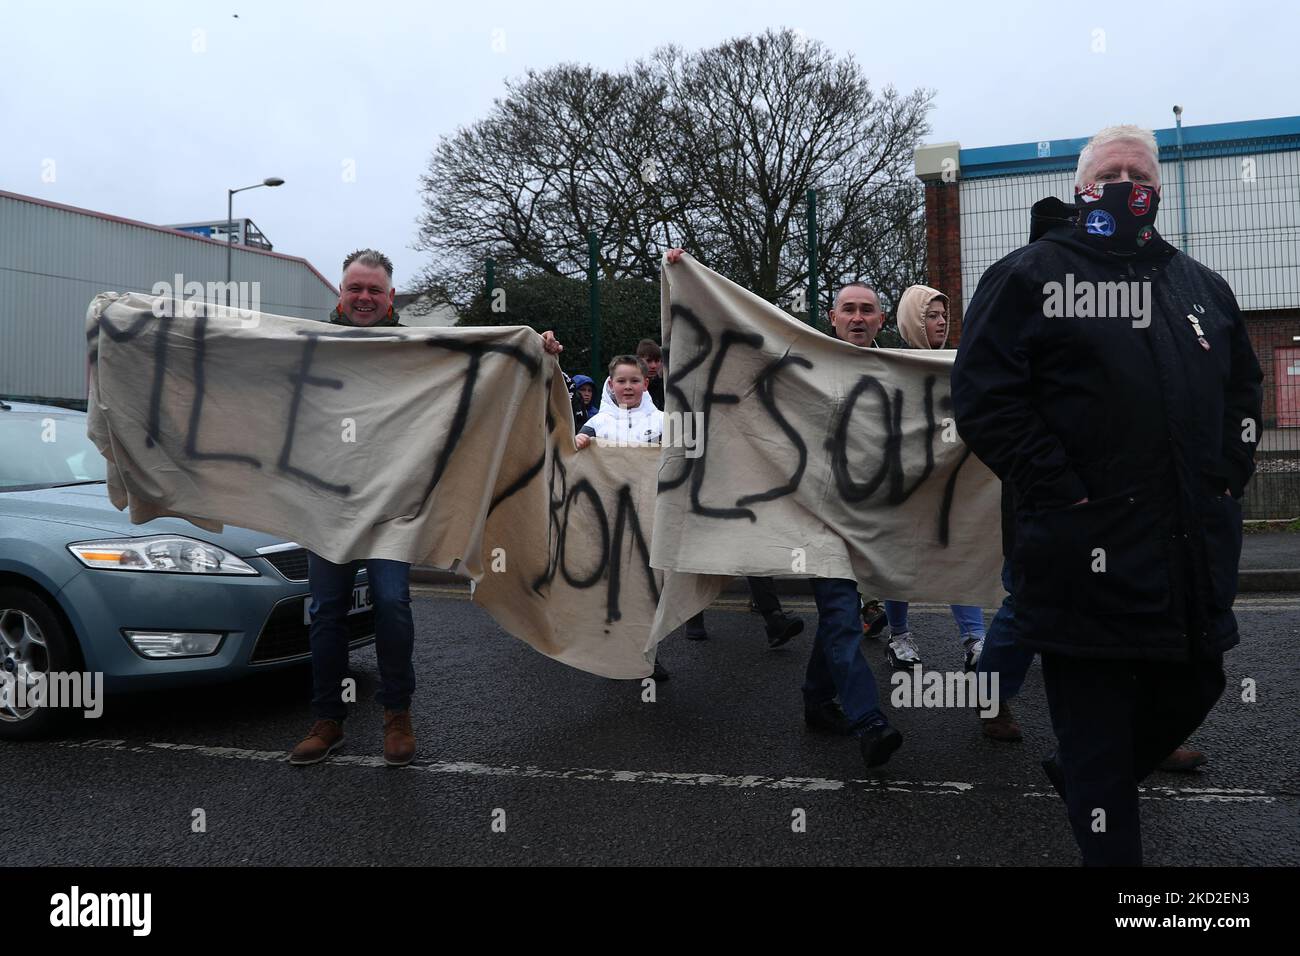 Walsall fans protest over the running of the club ahead of the Sky Bet League 2 match between Walsall and Tranmere Rovers at the Banks' Stadium, Walsall on Saturday 12th February 2022. (Photo by Kieran Riley/MI News/NurPhoto) Stock Photo